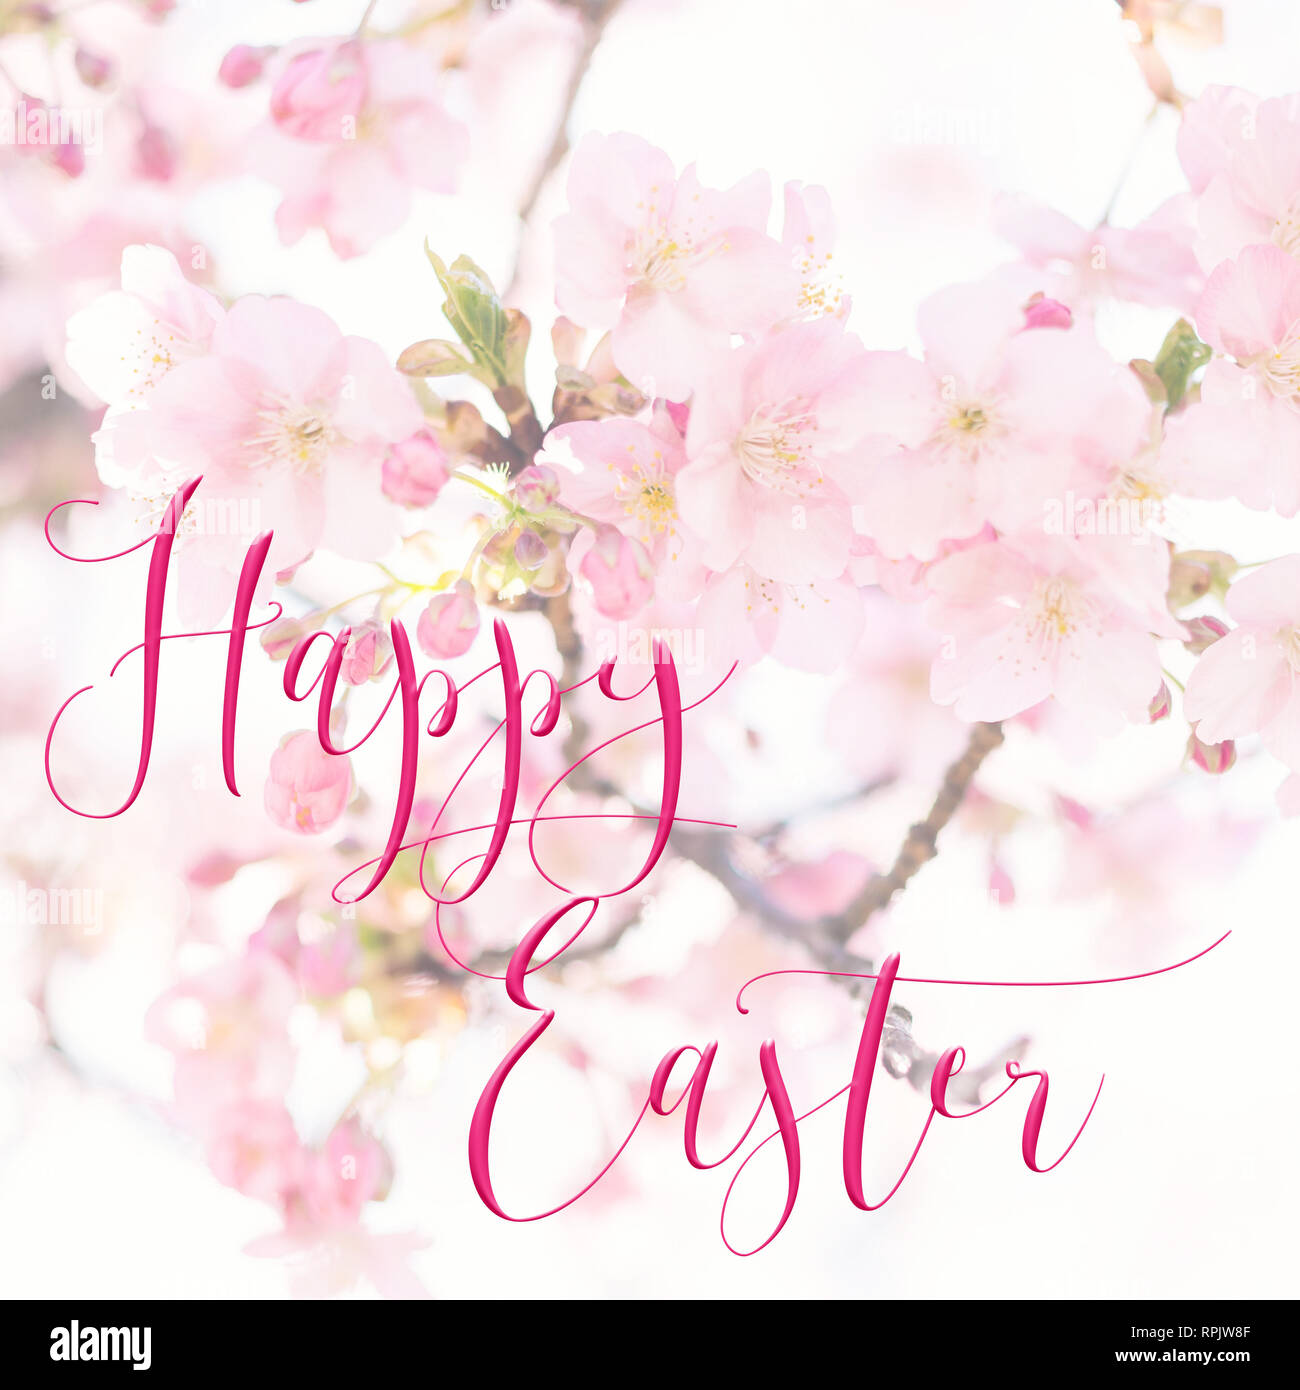 Square Easter background with pretty pink blossom, and â€˜Happy Easterâ€™ quote. Perfect for Easter Social Media campaigns. Stock Photo